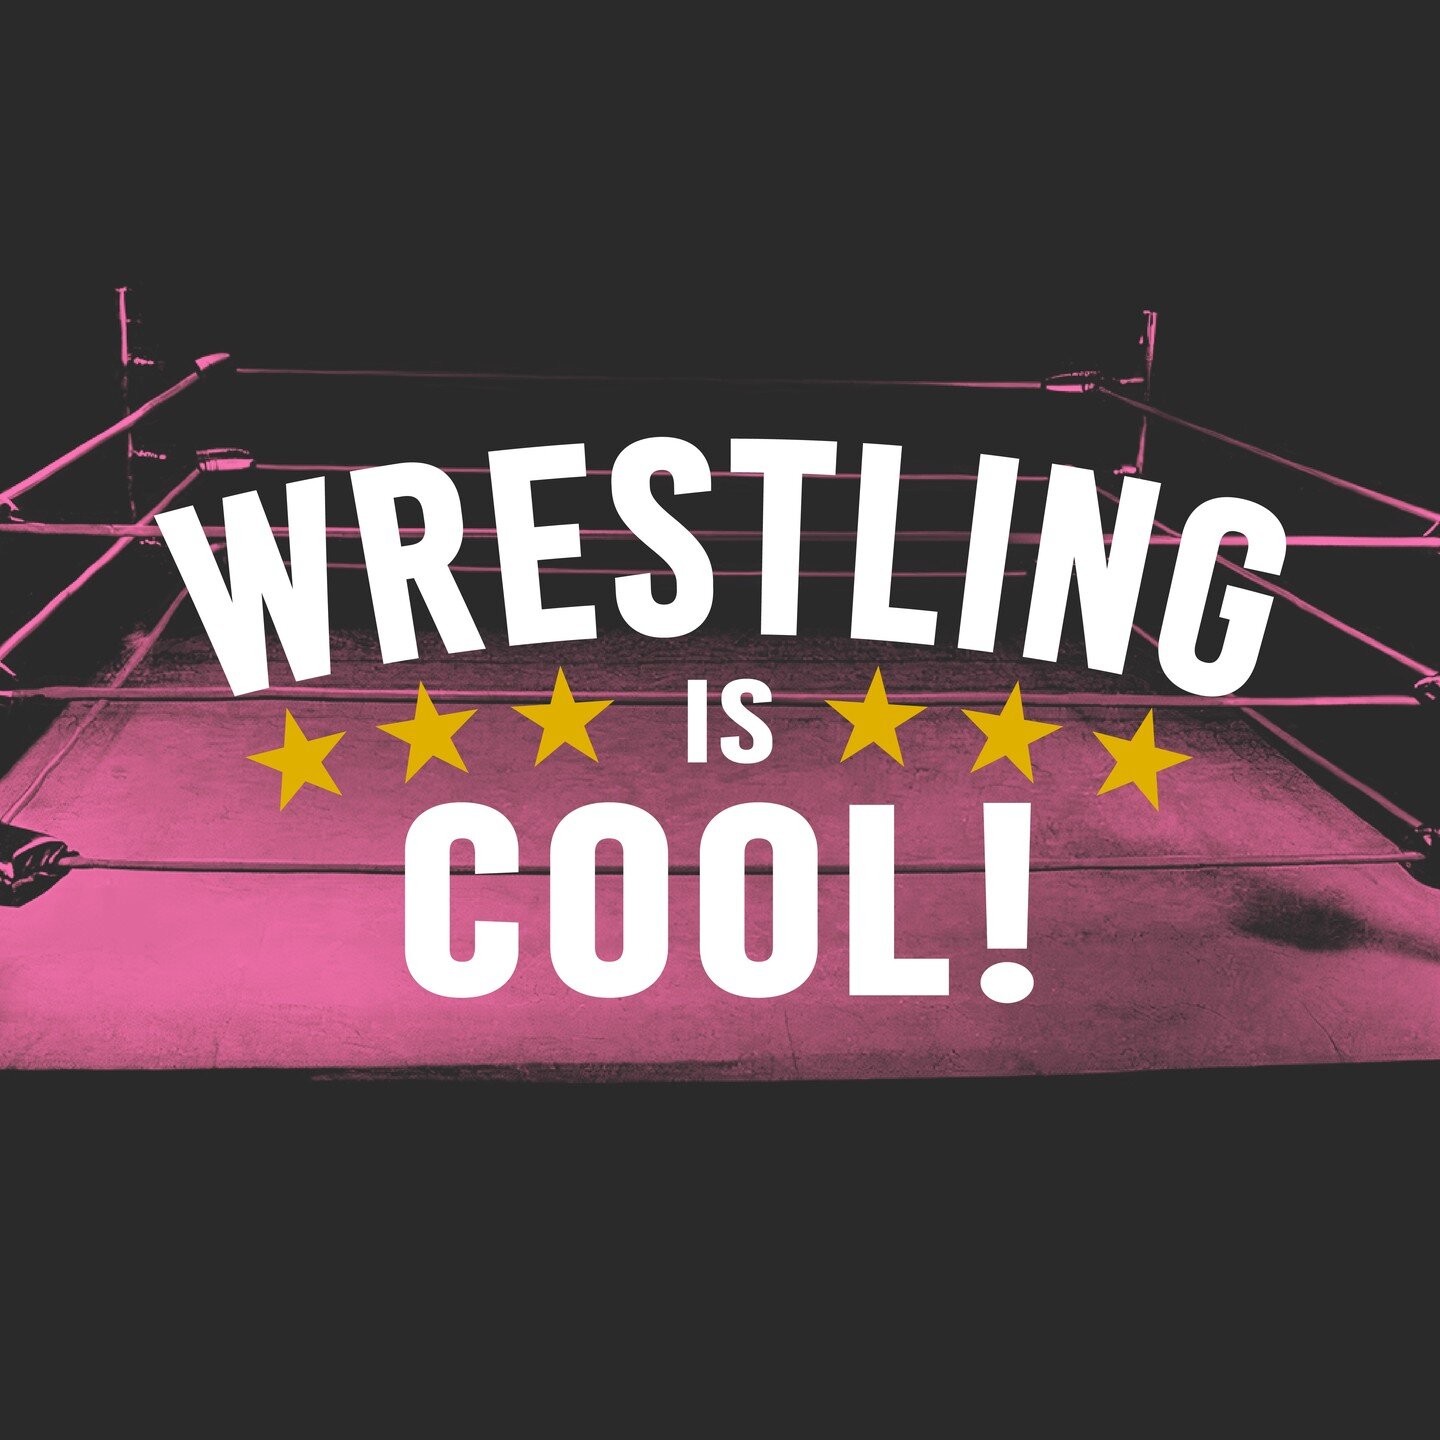 Ooh Yeah! Had the pleasure of working with @sanchowest &amp; @mrsantizap_ on a new logo for their Wrestling is Cool! podcast.

Love the retro look we settled on &amp; I'm excited to see their channel continue grow! If you haven't, check them out they